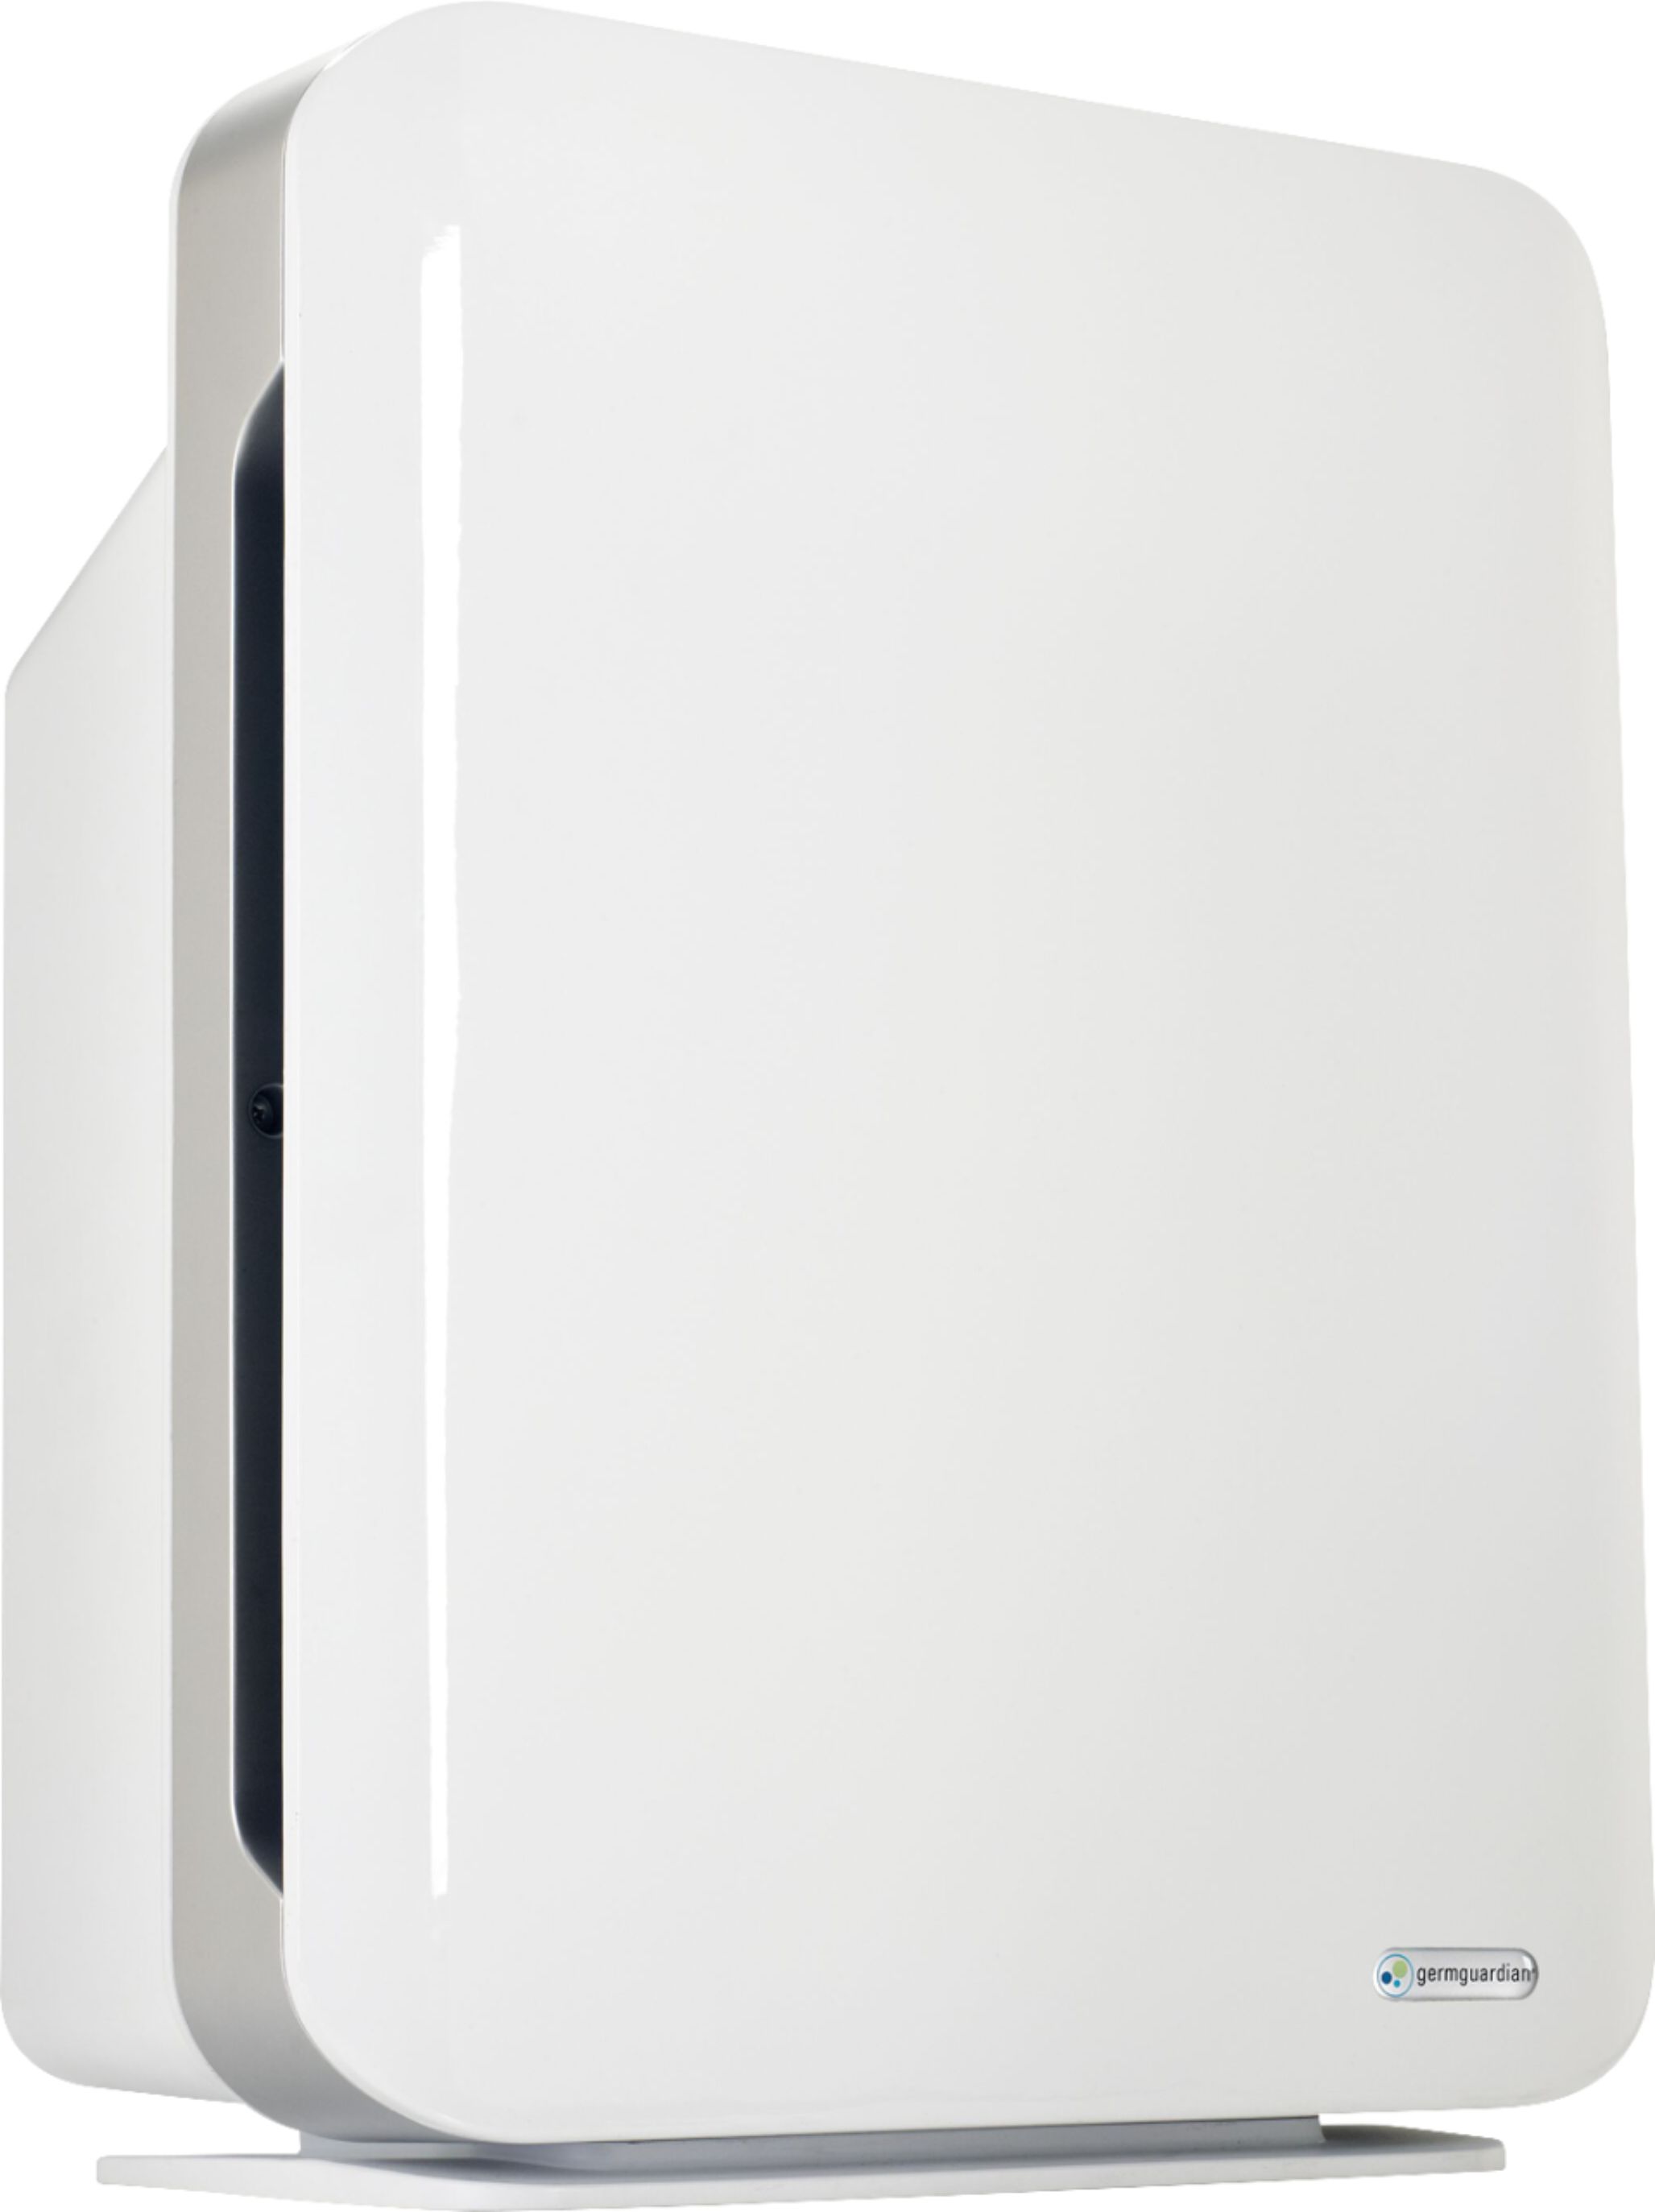 Angle View: Wynd - Plus Smart Personal Air Purifier - White